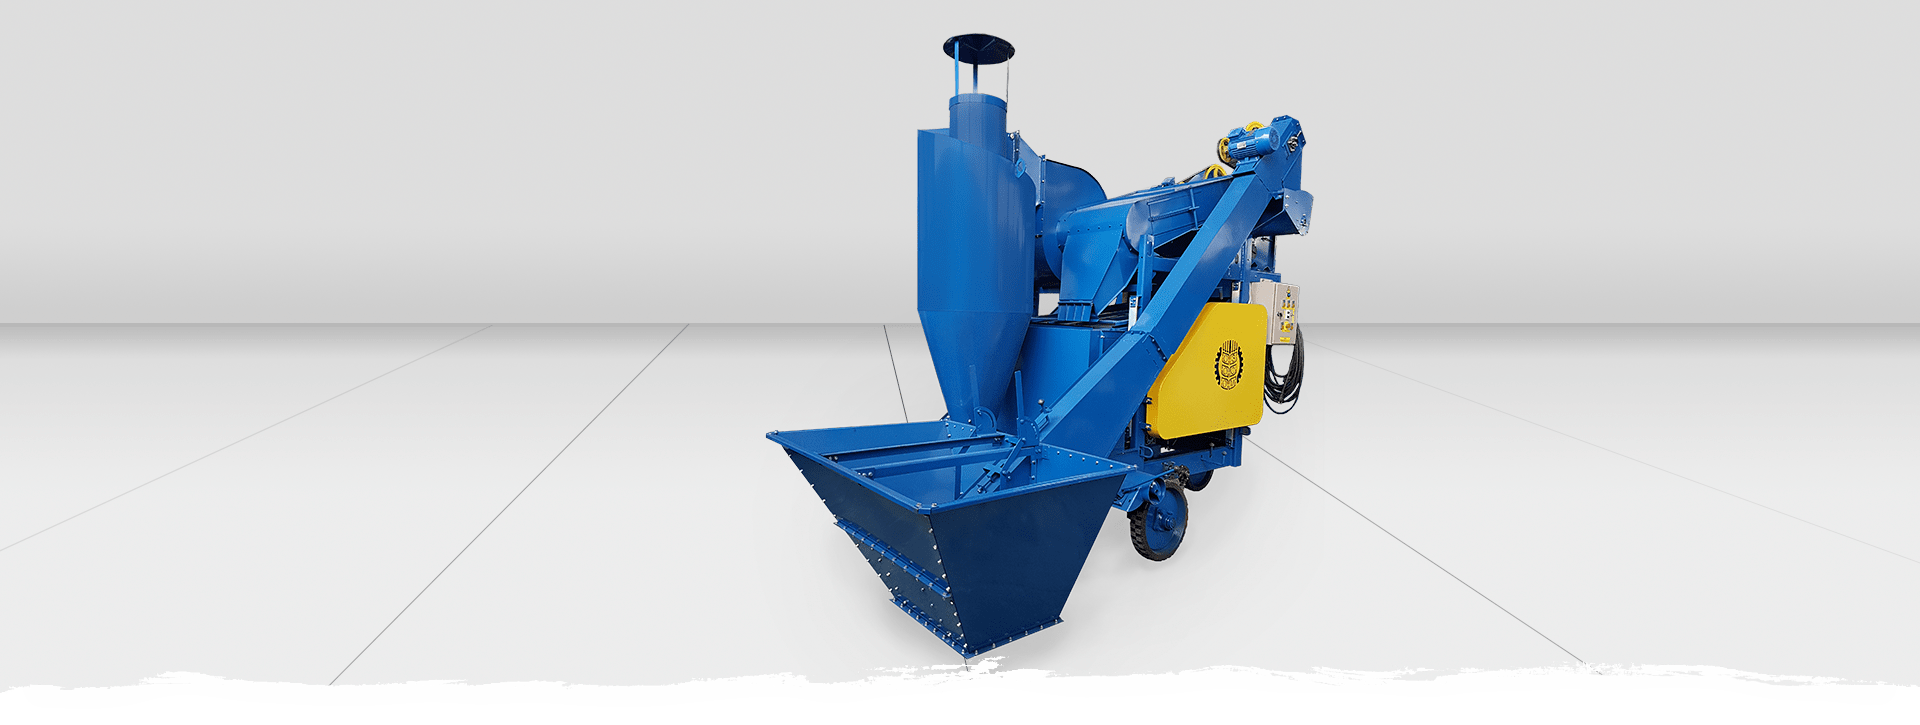 Self-propelled grain cleaner OBC-25CB with a cyclone and a hopper for quick cleaning of any grain